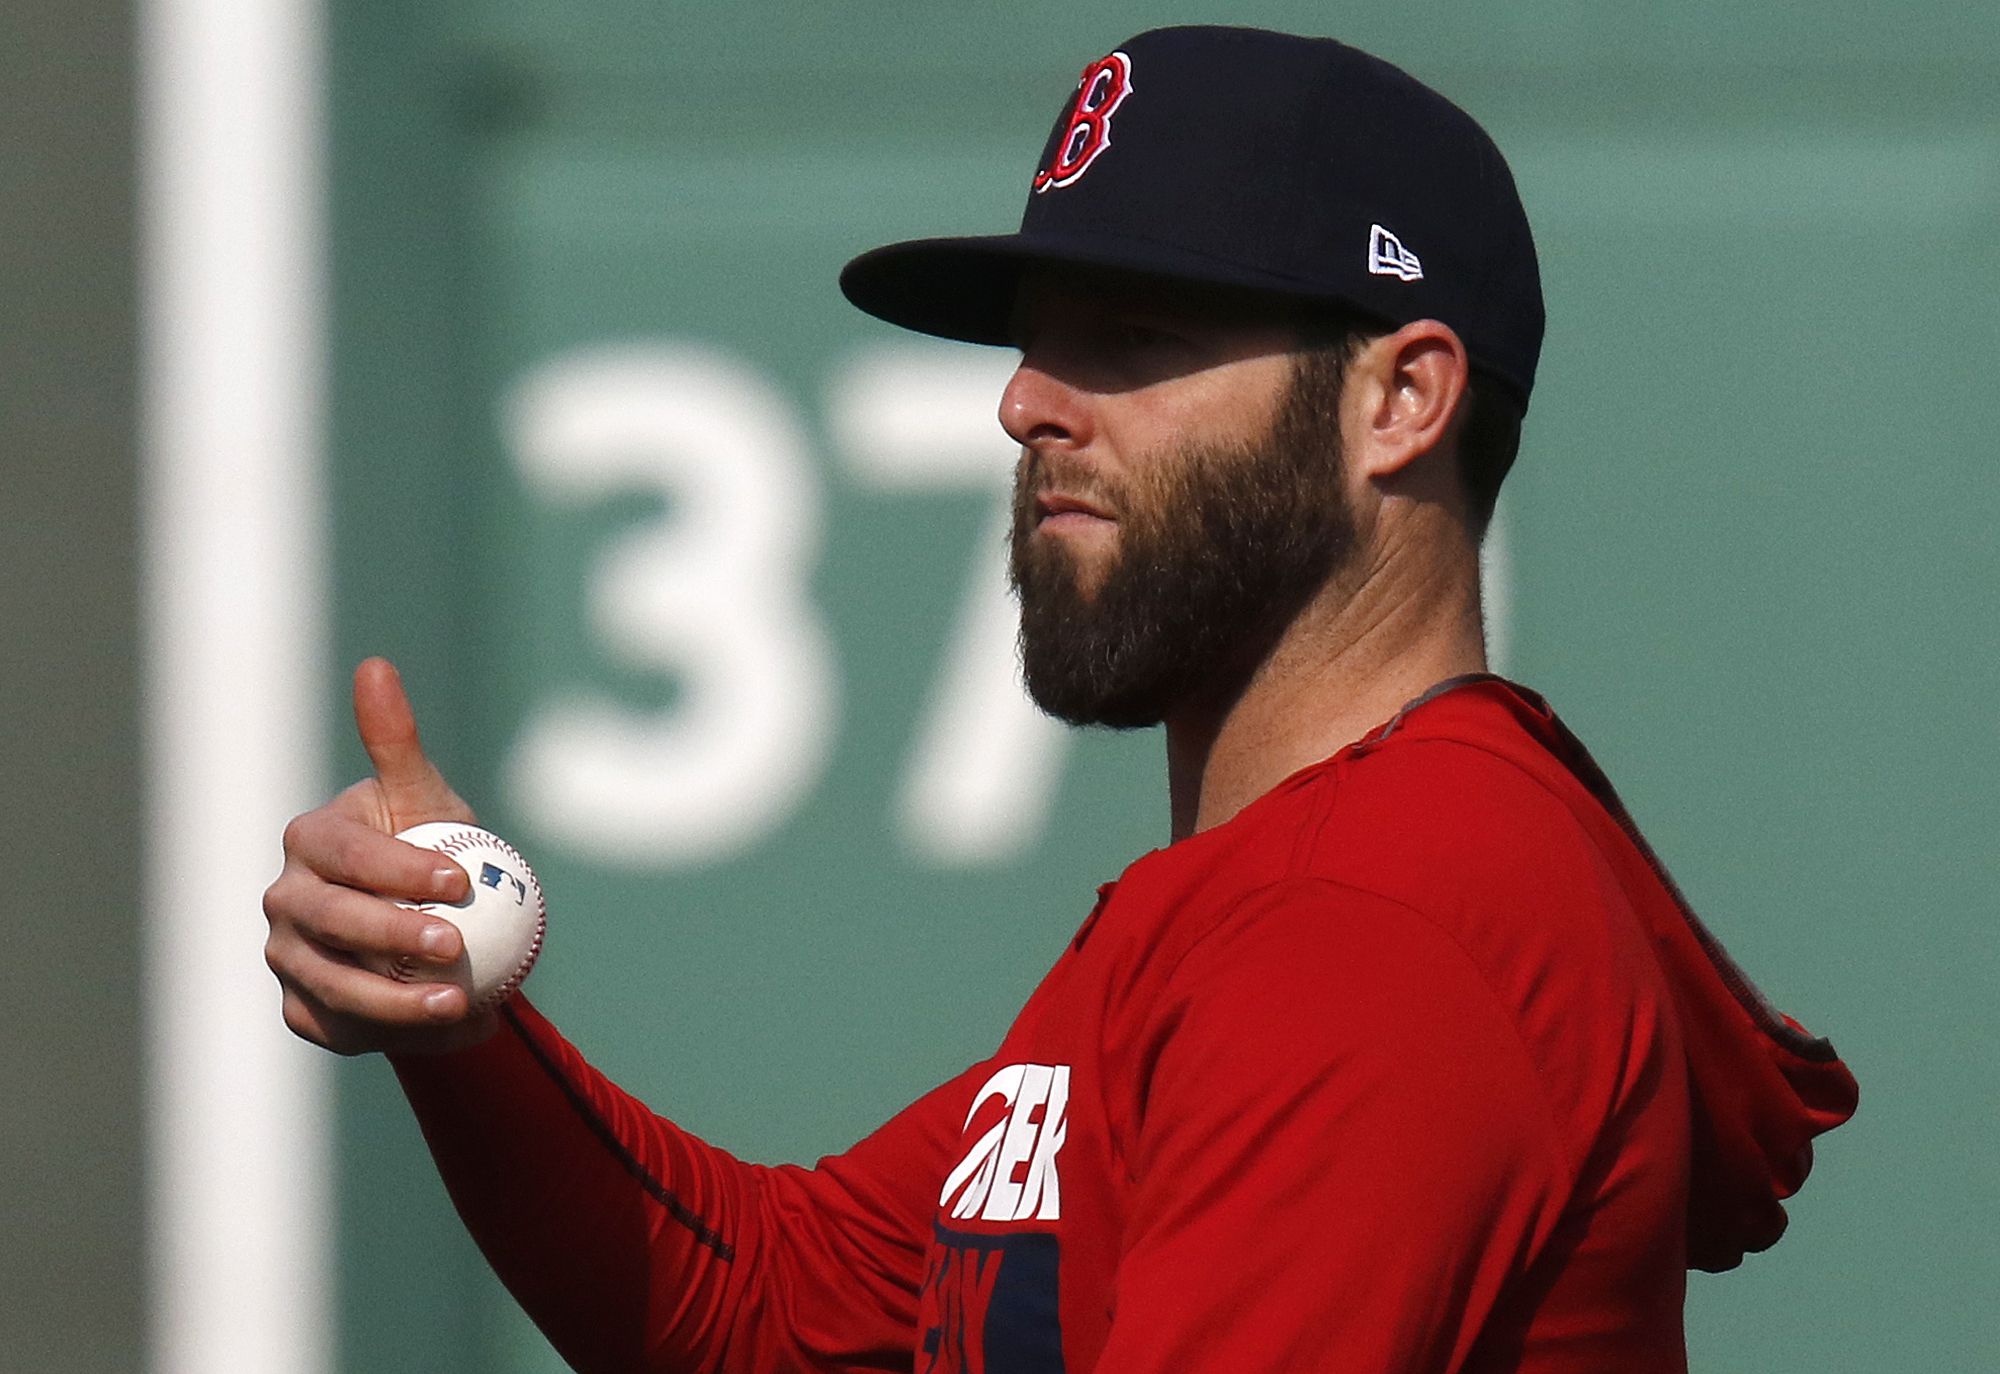 Dustin Pedroia's Red Sox roster status